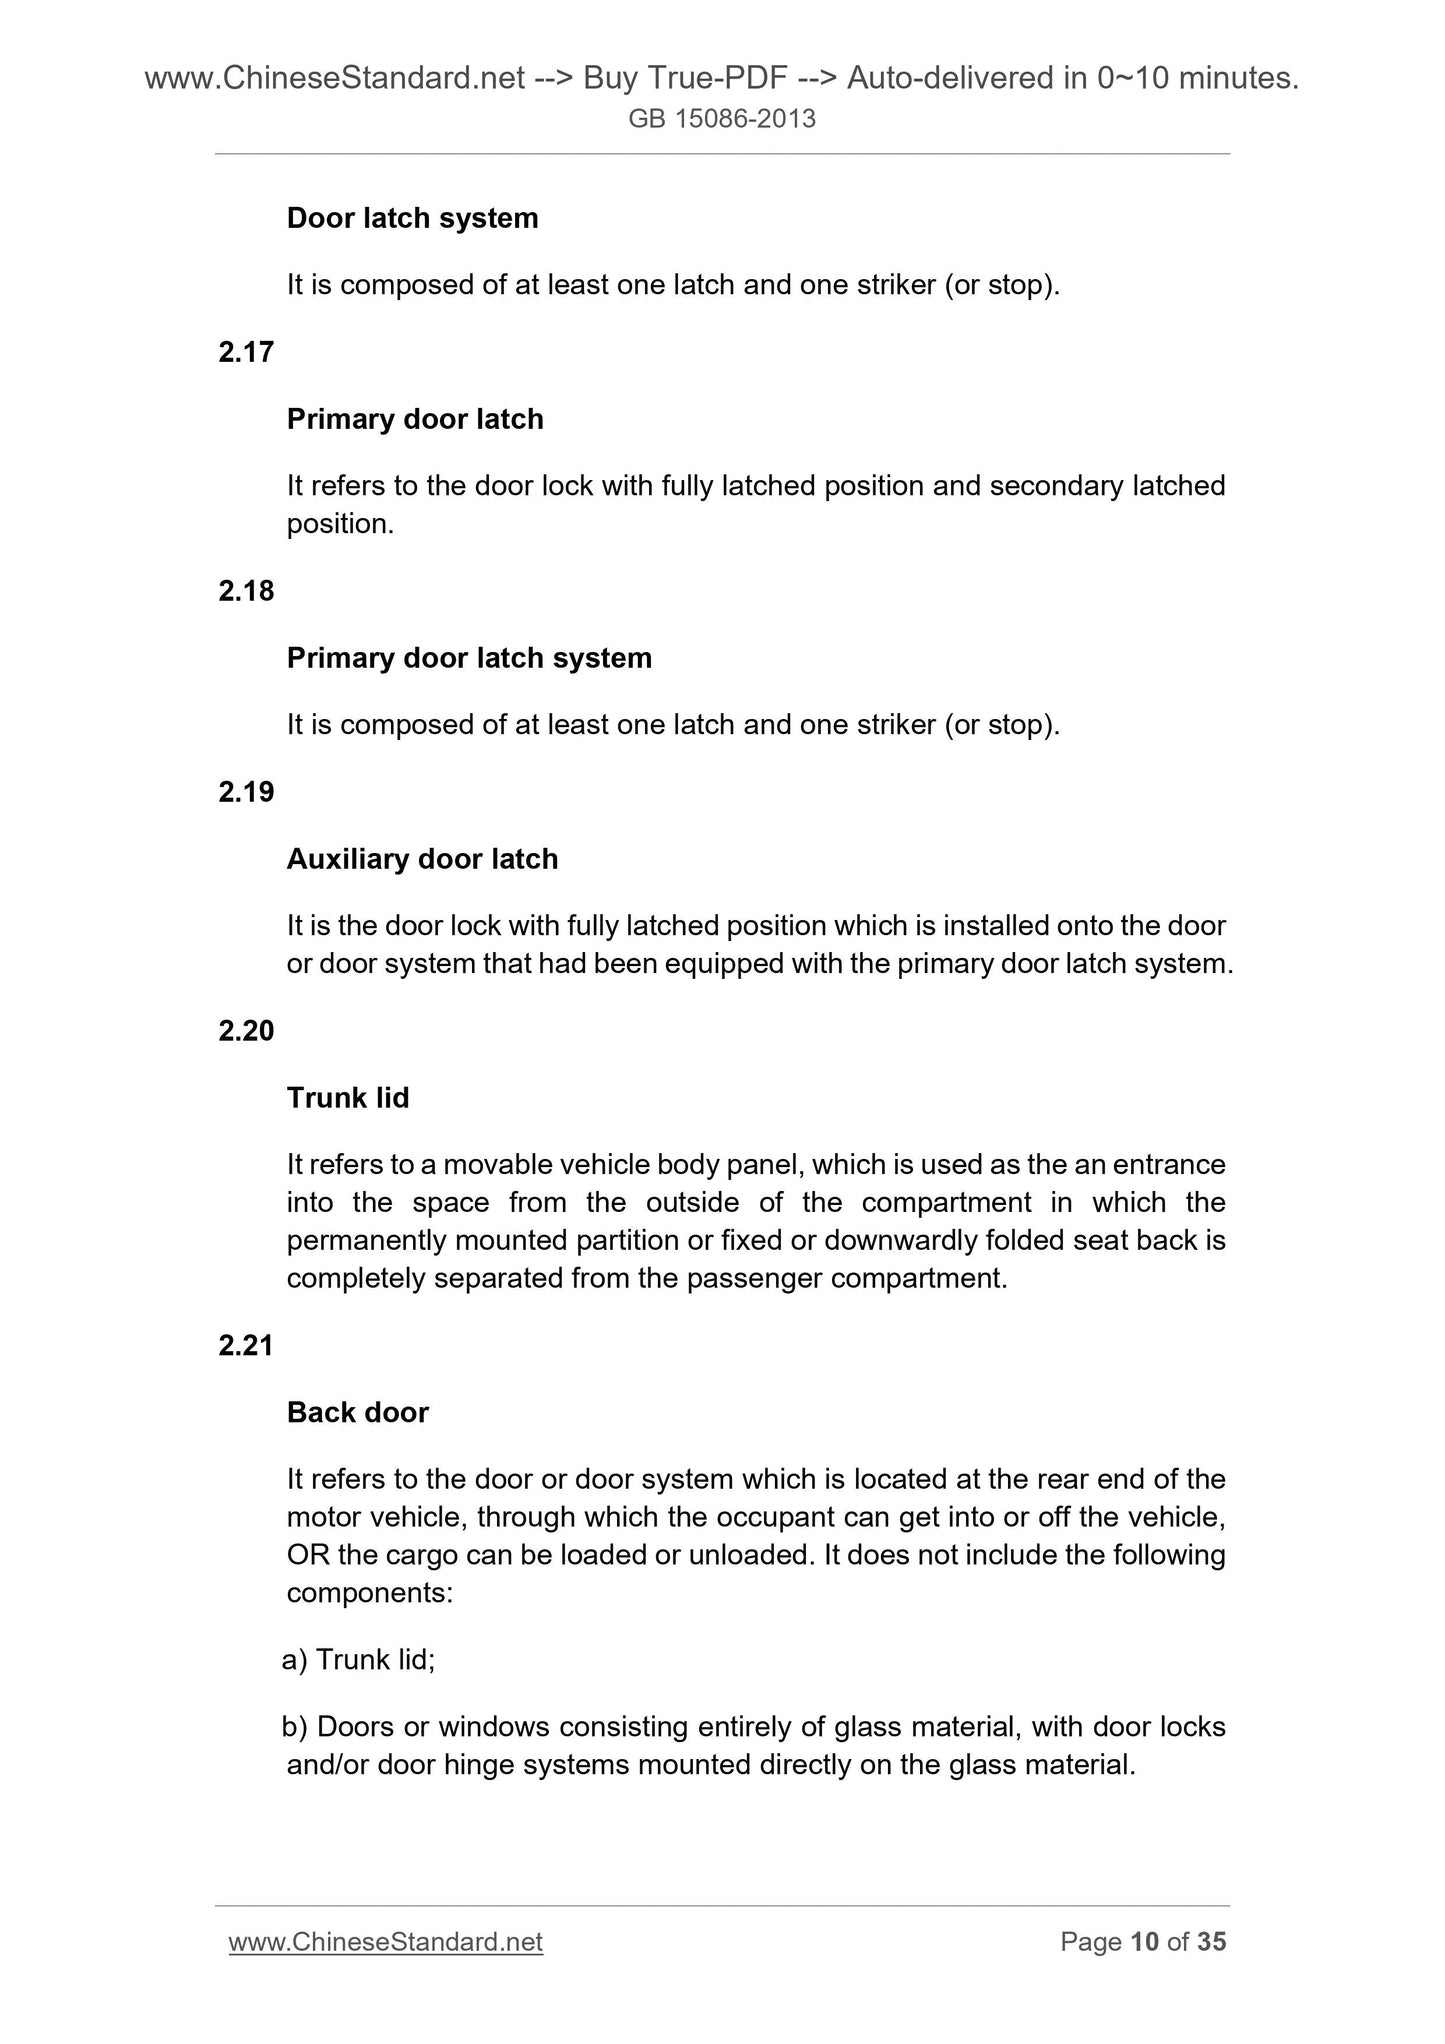 GB 15086-2013 Page 6